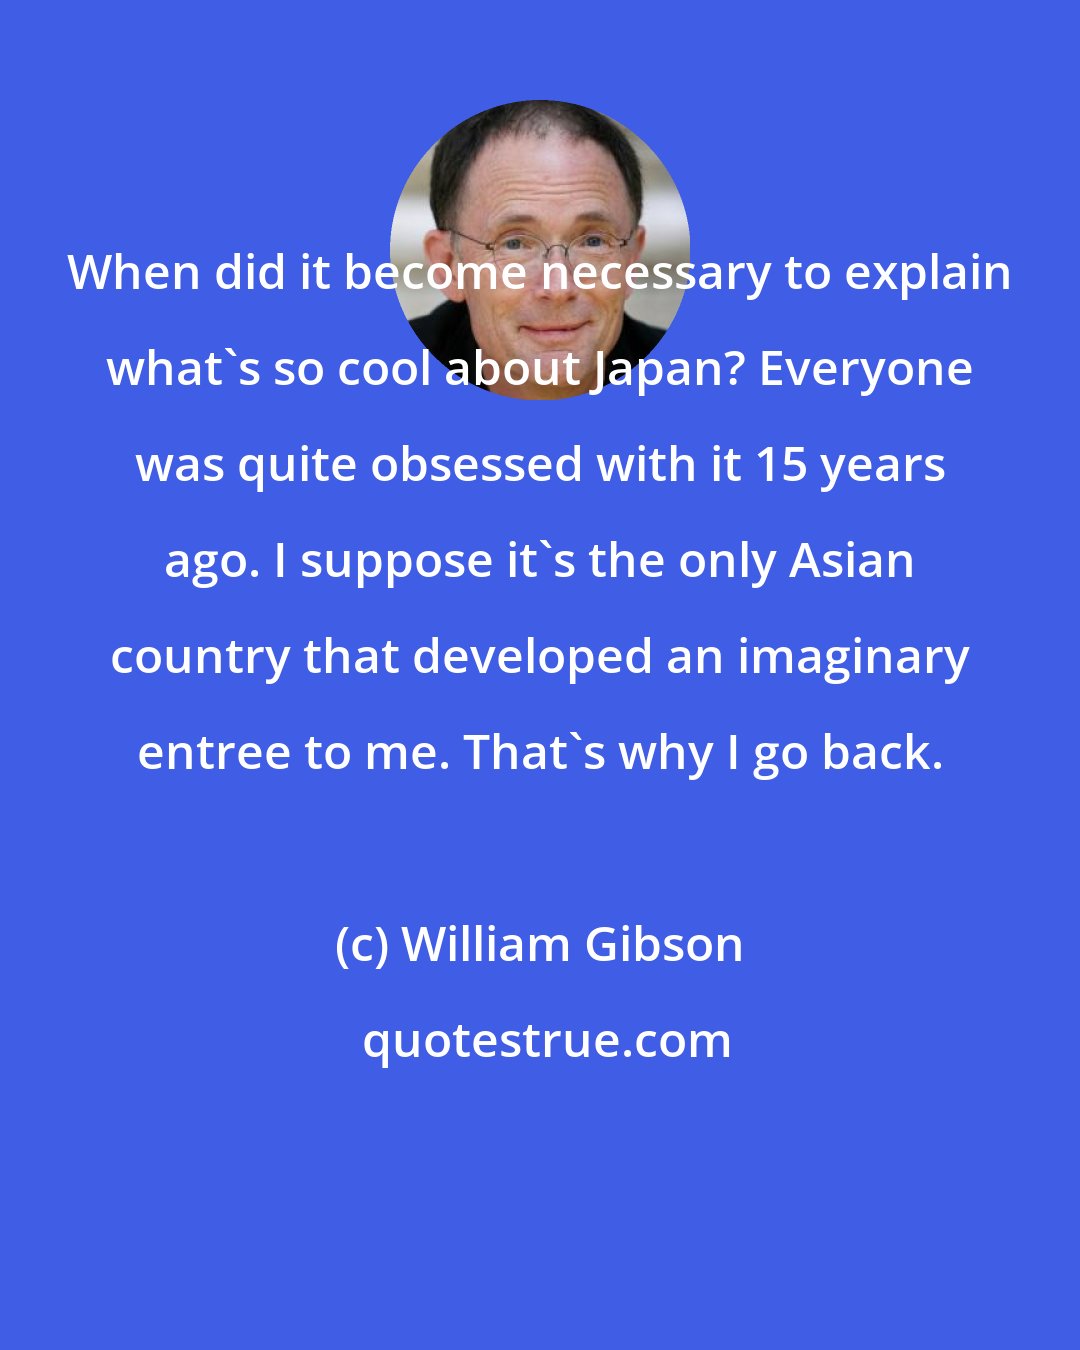 William Gibson: When did it become necessary to explain what's so cool about Japan? Everyone was quite obsessed with it 15 years ago. I suppose it's the only Asian country that developed an imaginary entree to me. That's why I go back.